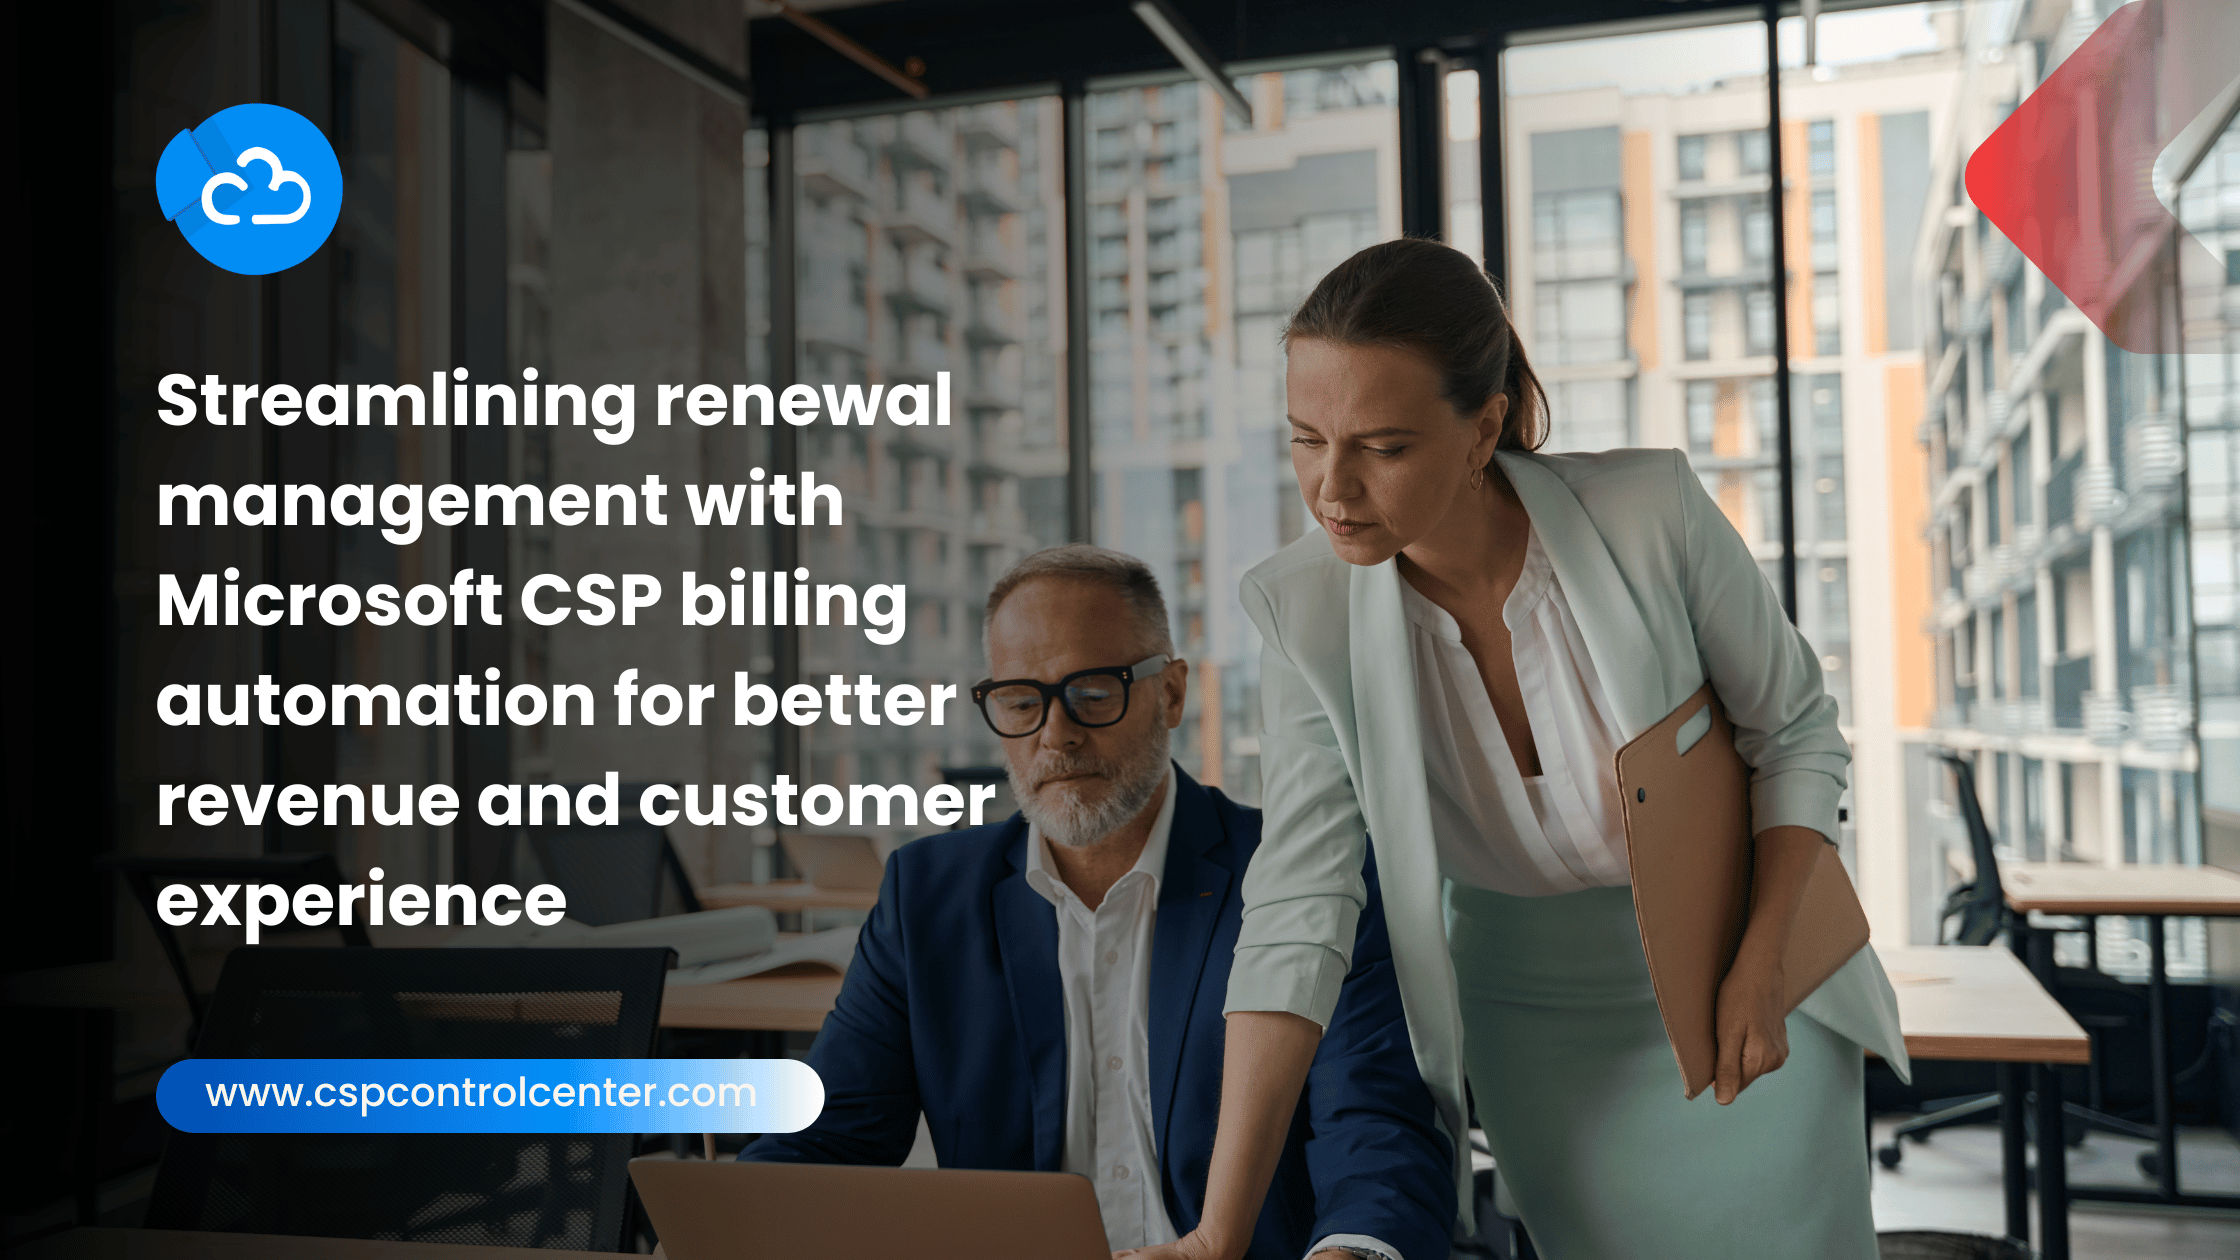 Streamlining renewal management with Microsoft CSP billing automation for better revenue and customer experience outcome